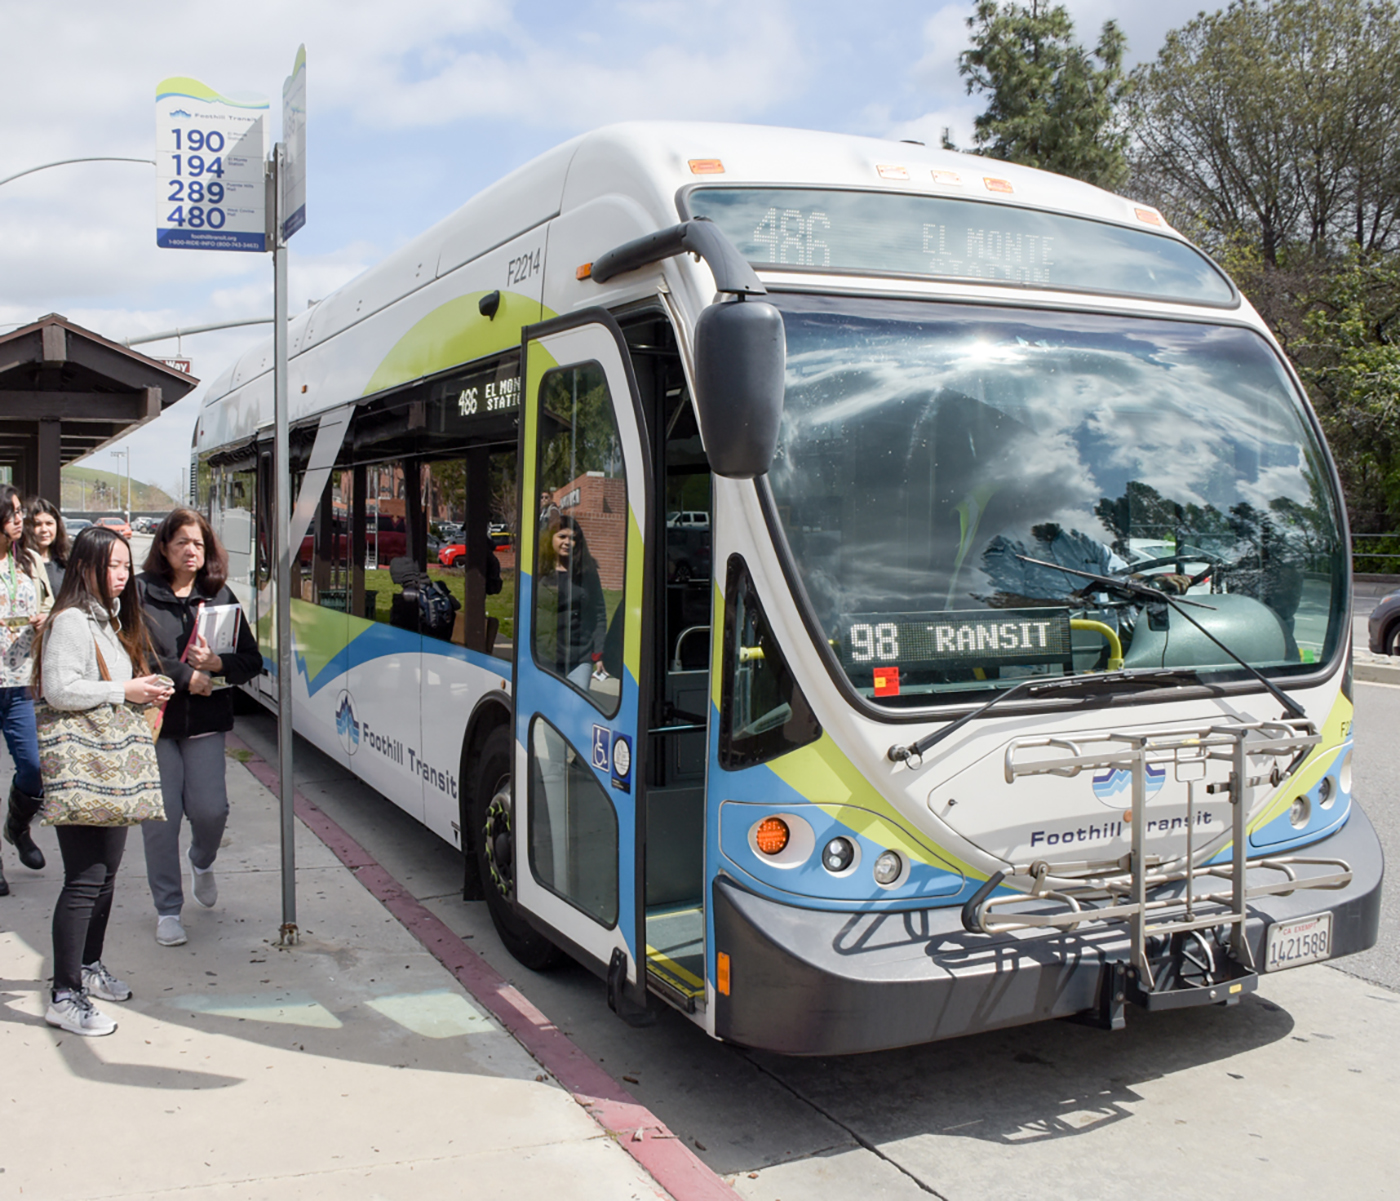 The Class Pass gives you a semester break from parking through free rides on Foothill Transit buses.